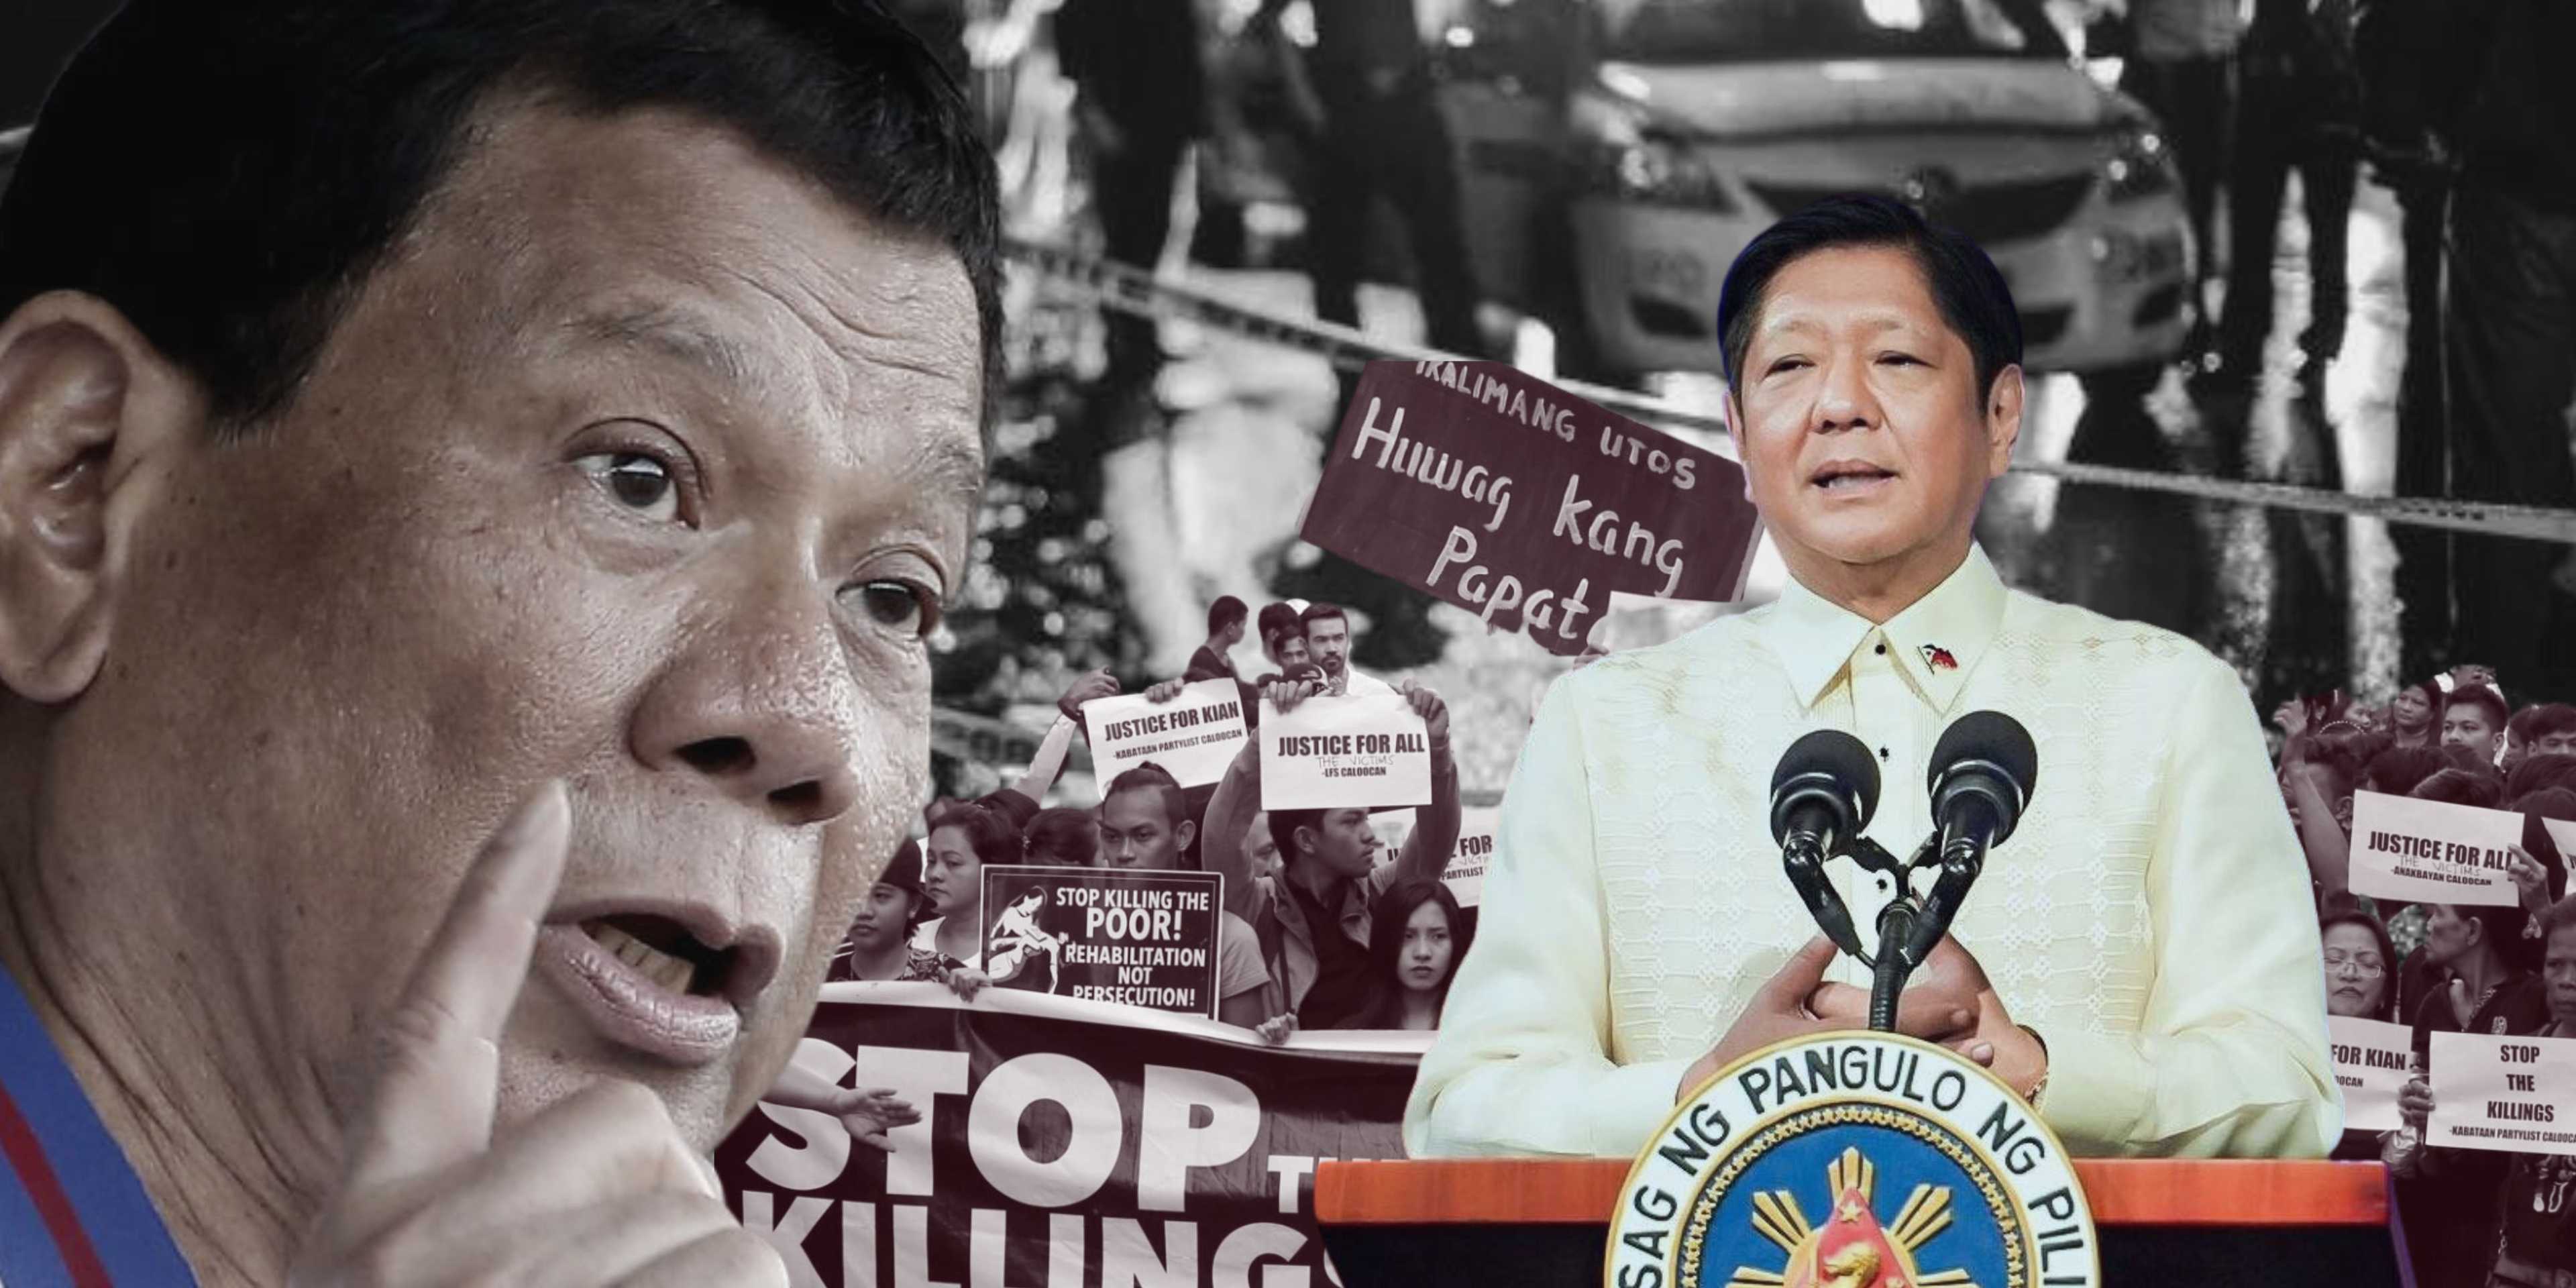 'There were abuses by certain elements in the government' Marcos on Duterte's drug war